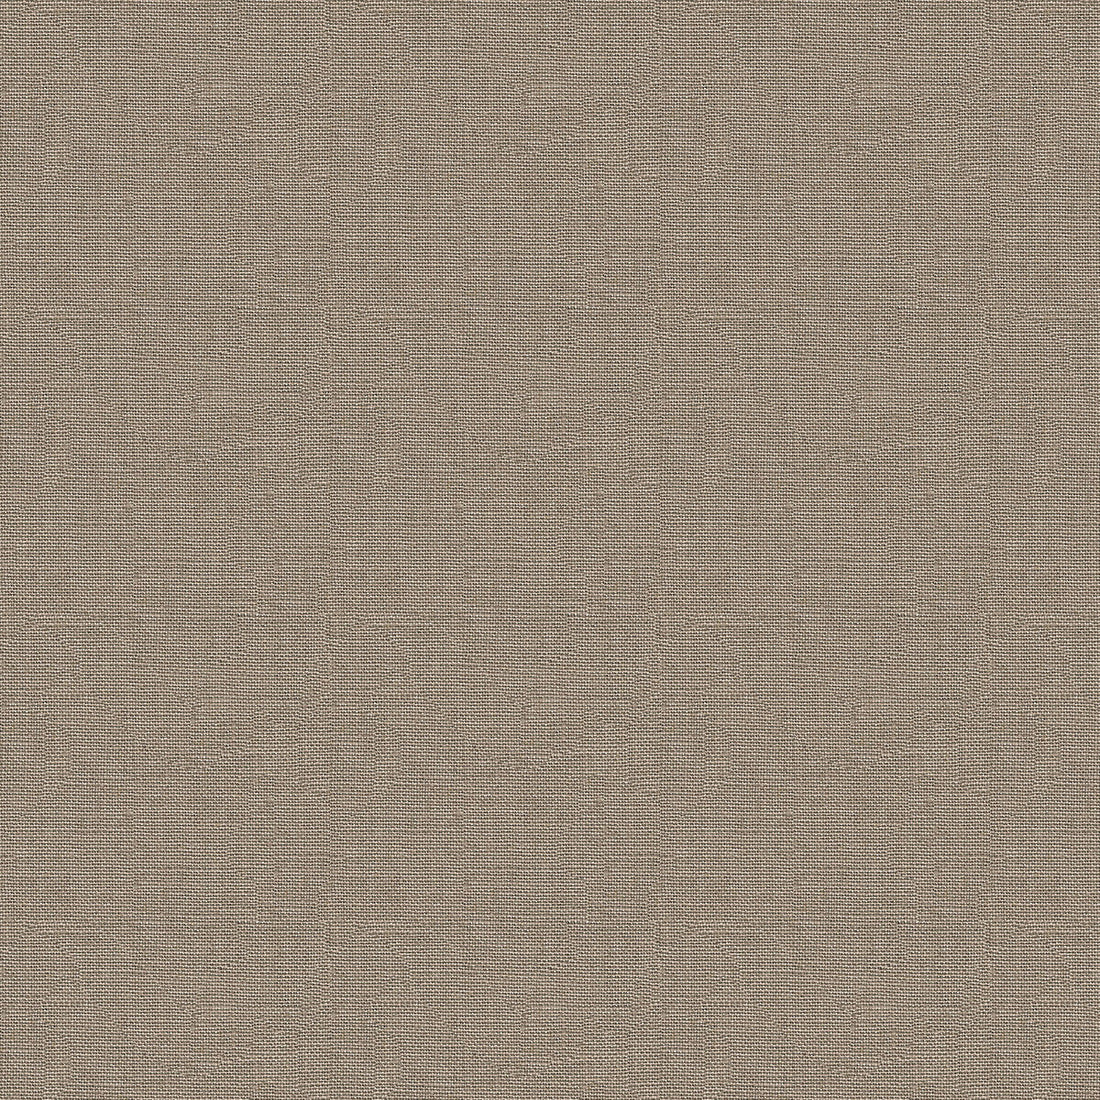 Hampton Linen fabric in oats color - pattern 2012171.11.0 - by Lee Jofa in the Colour Complements II collection